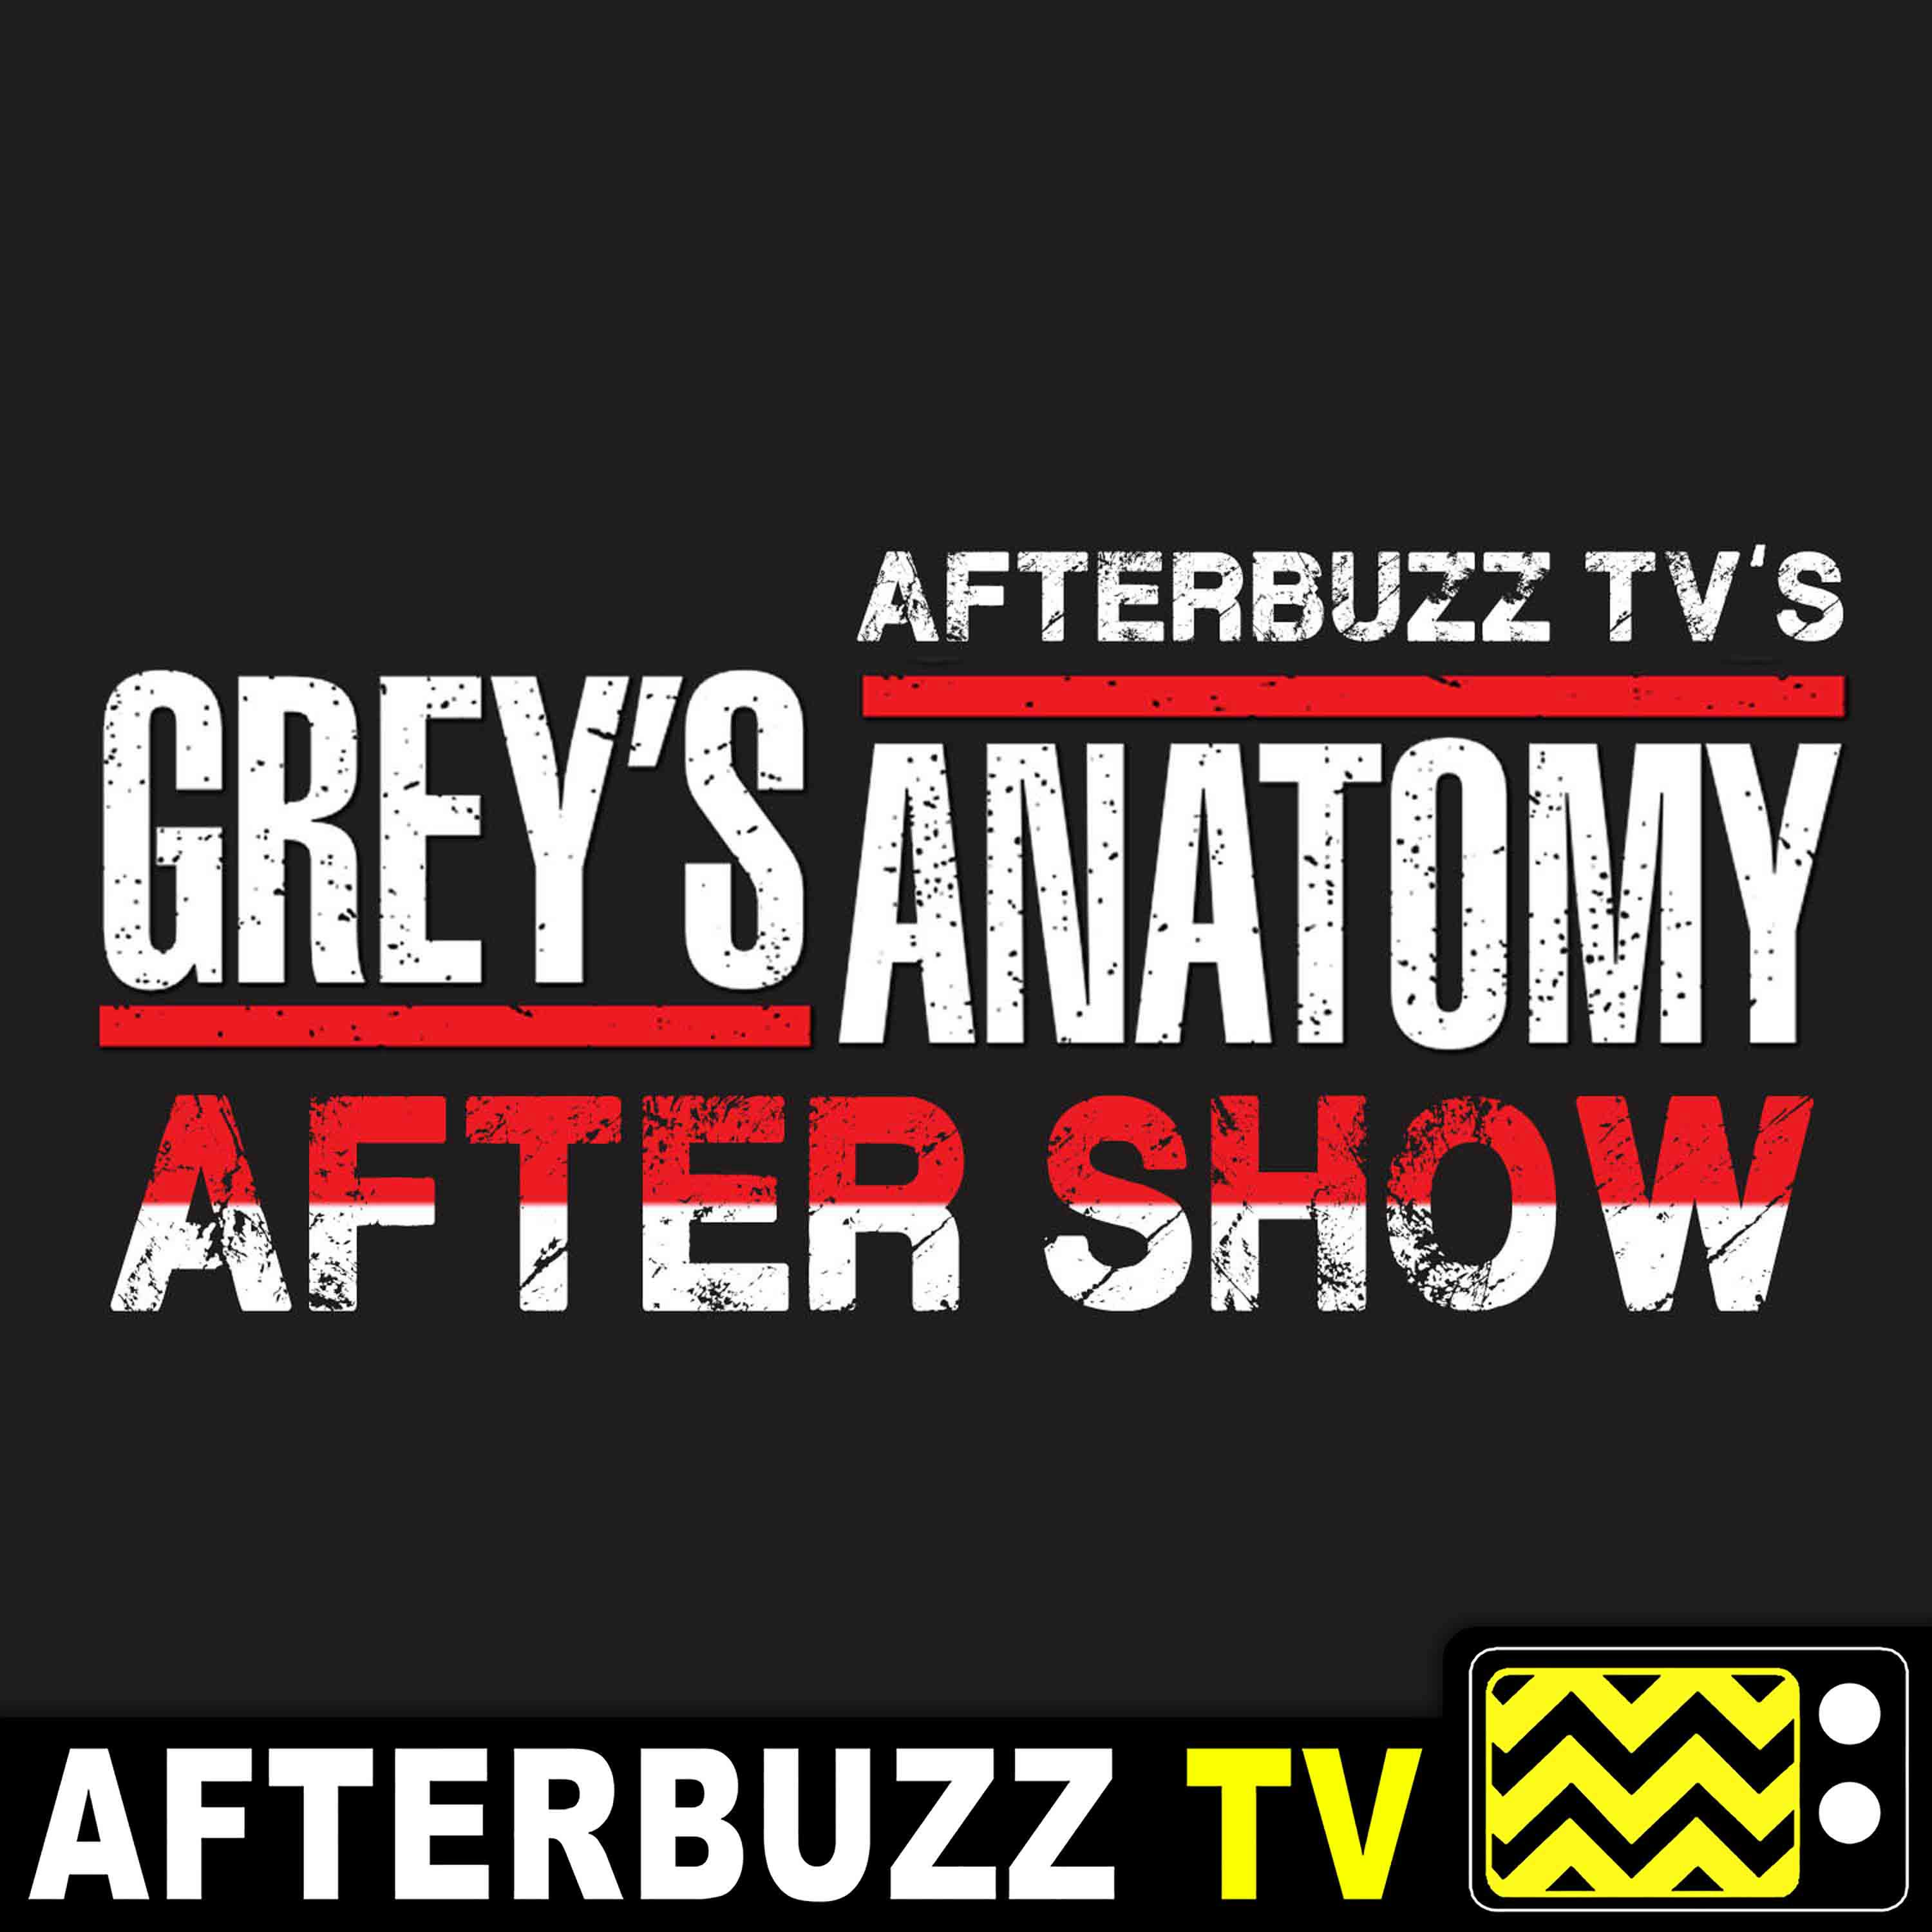 "Nothing Left to Cling To" Season 16 Episode 1 'Grey's Anatomy' Review